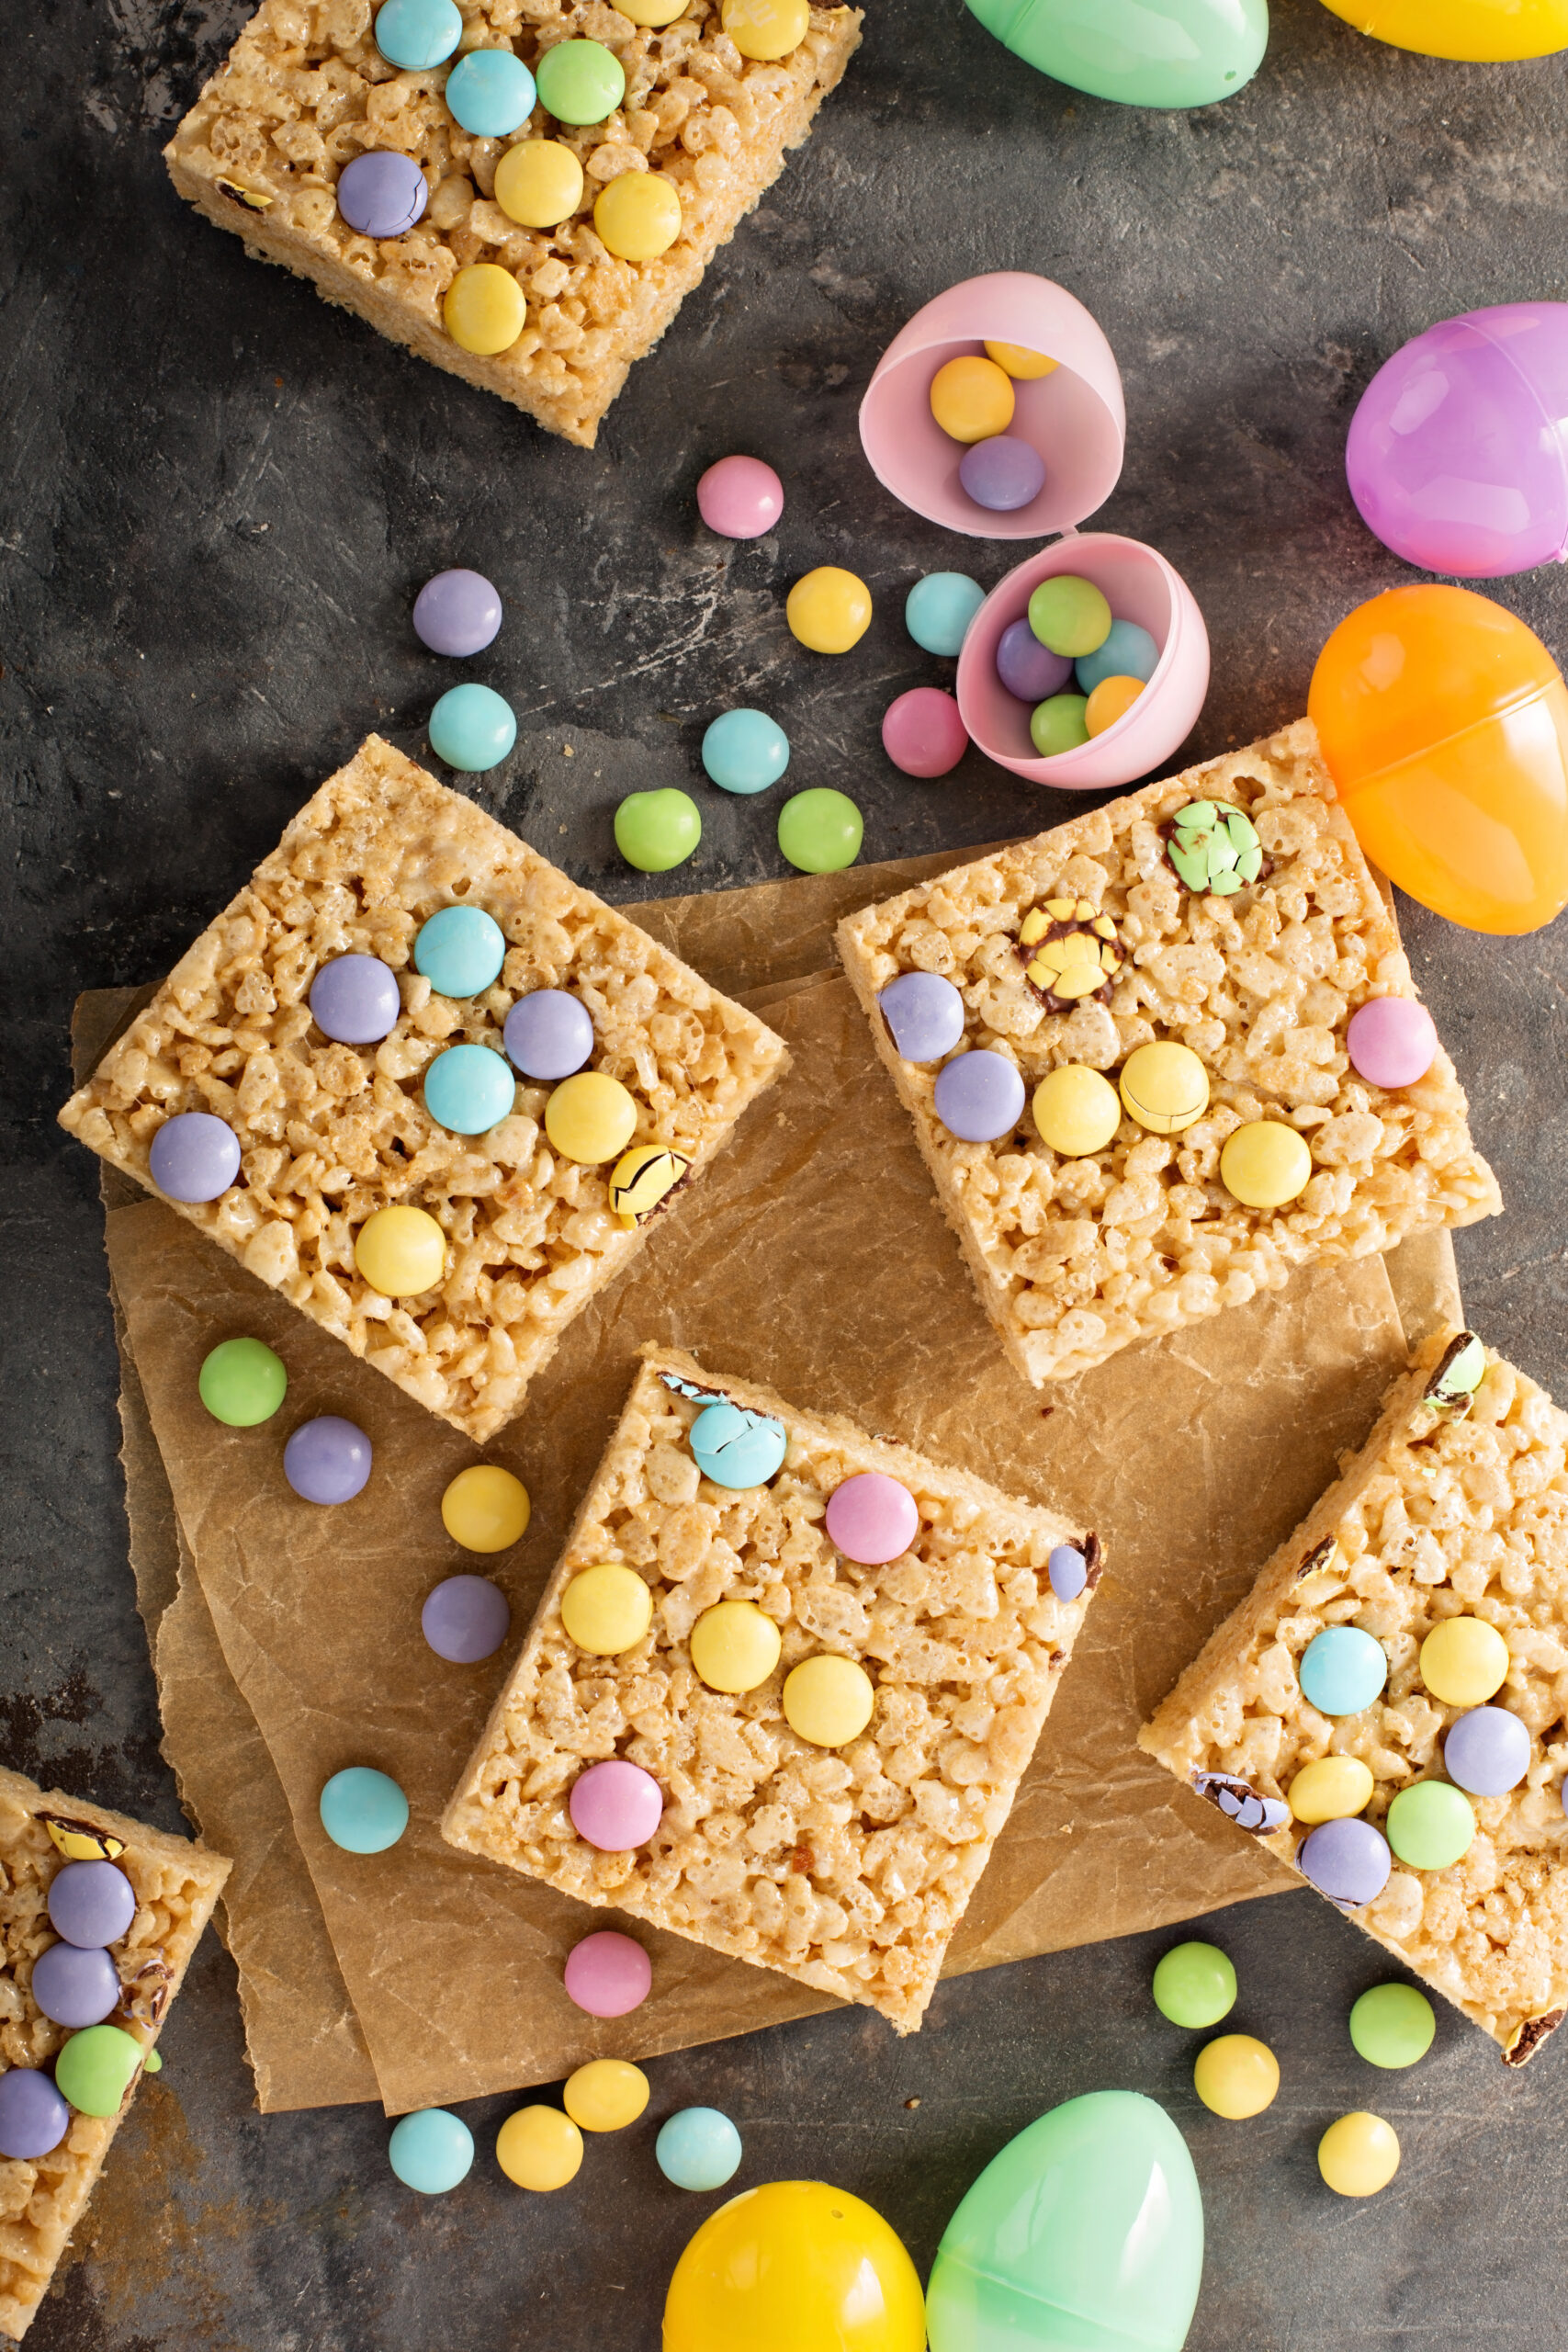 Mini Egg Rice Krispie Squares Recipe; Made with crispy rice cereal, marshmallows, Cadbury mini eggs. These mini egg rice krispie treats are a fun and easy Easter dessert perfect to share with friends or family.